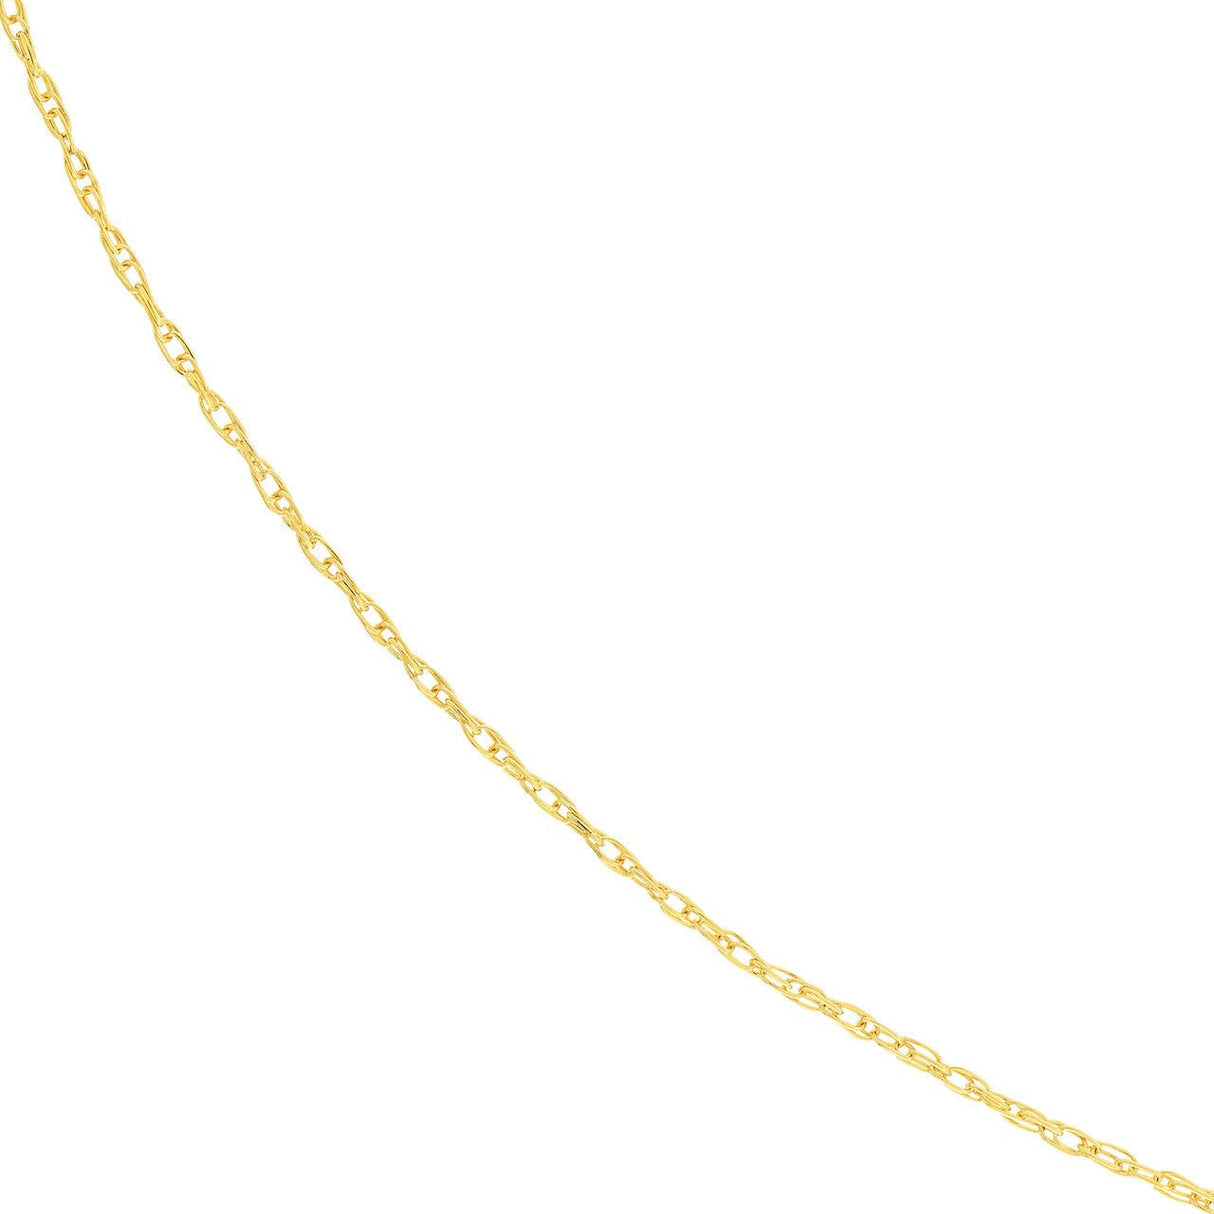 10K Gold Chain, 18", 0.65mm Pendant Rope Chain with Spring Ring, Gold Layered Chain, Gold Necklace, - Diamond Origin